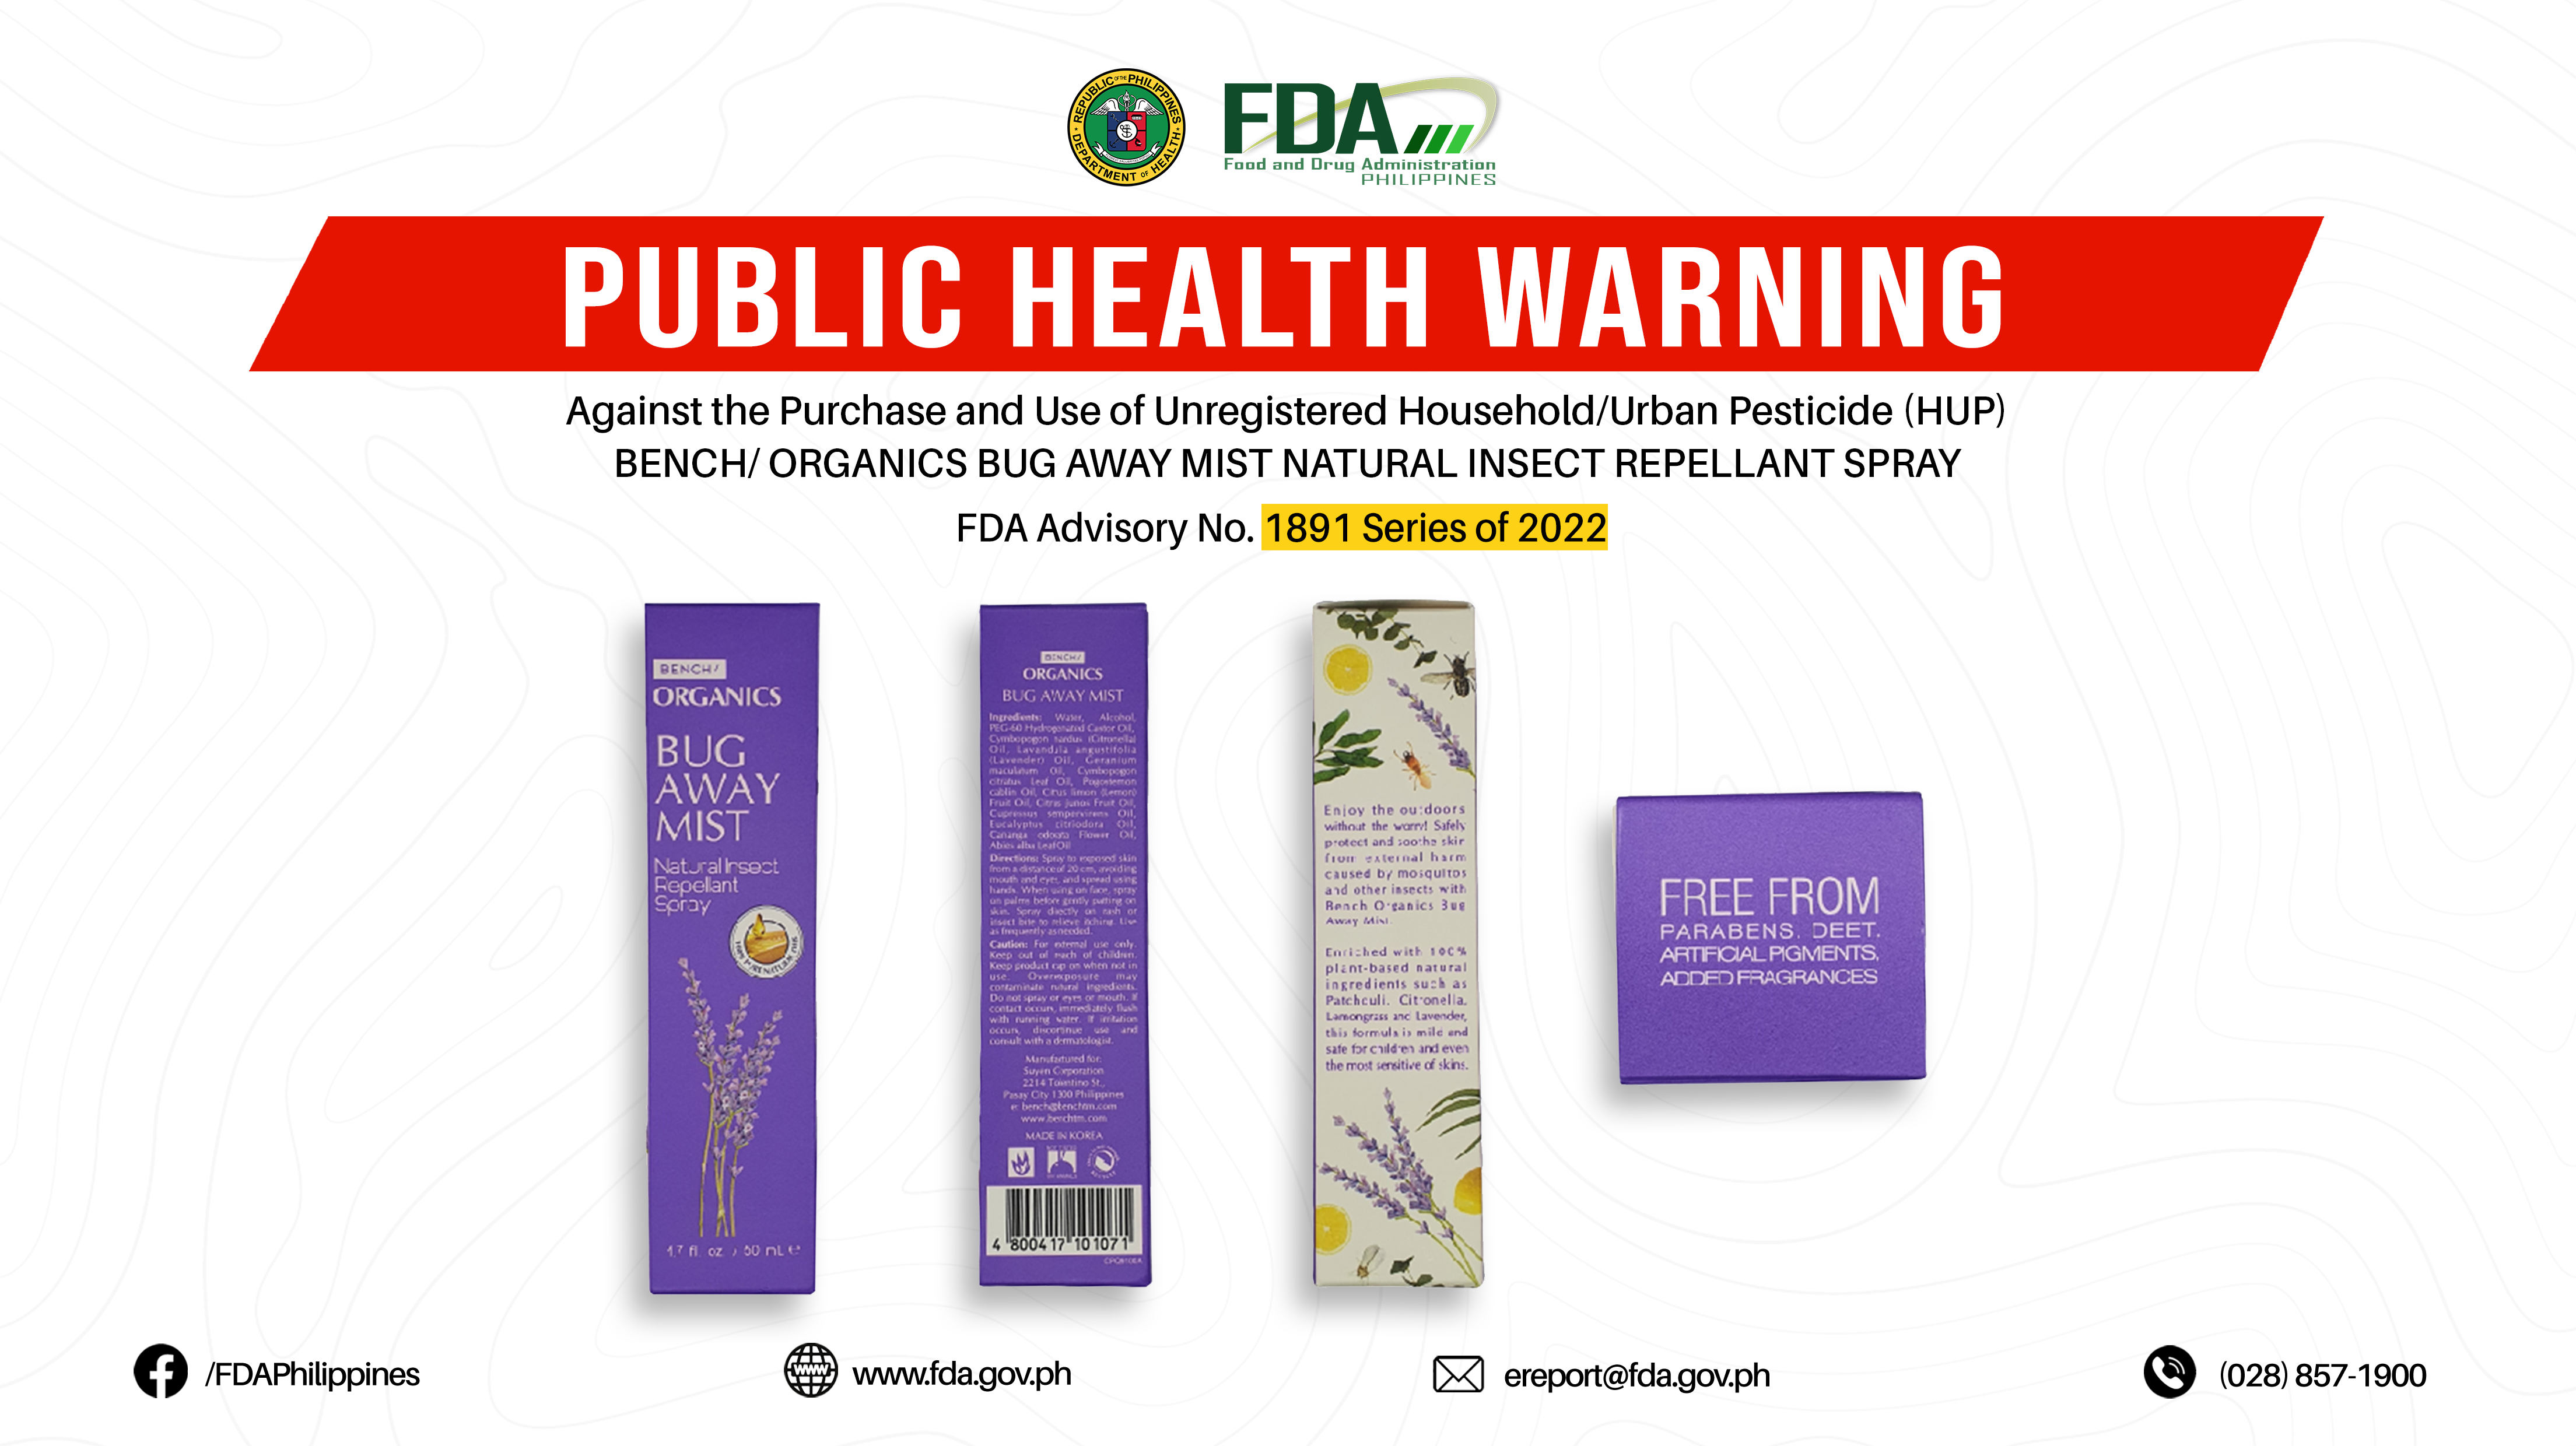 FDA Advisory No.2022-1891 || Public Health Warning Against the Purchase and Use of Unregistered Household/Urban Pesticide (HUP) BENCH/ ORGANICS BUG AWAY MIST NATURAL INSECT REPELLANT SPRAY